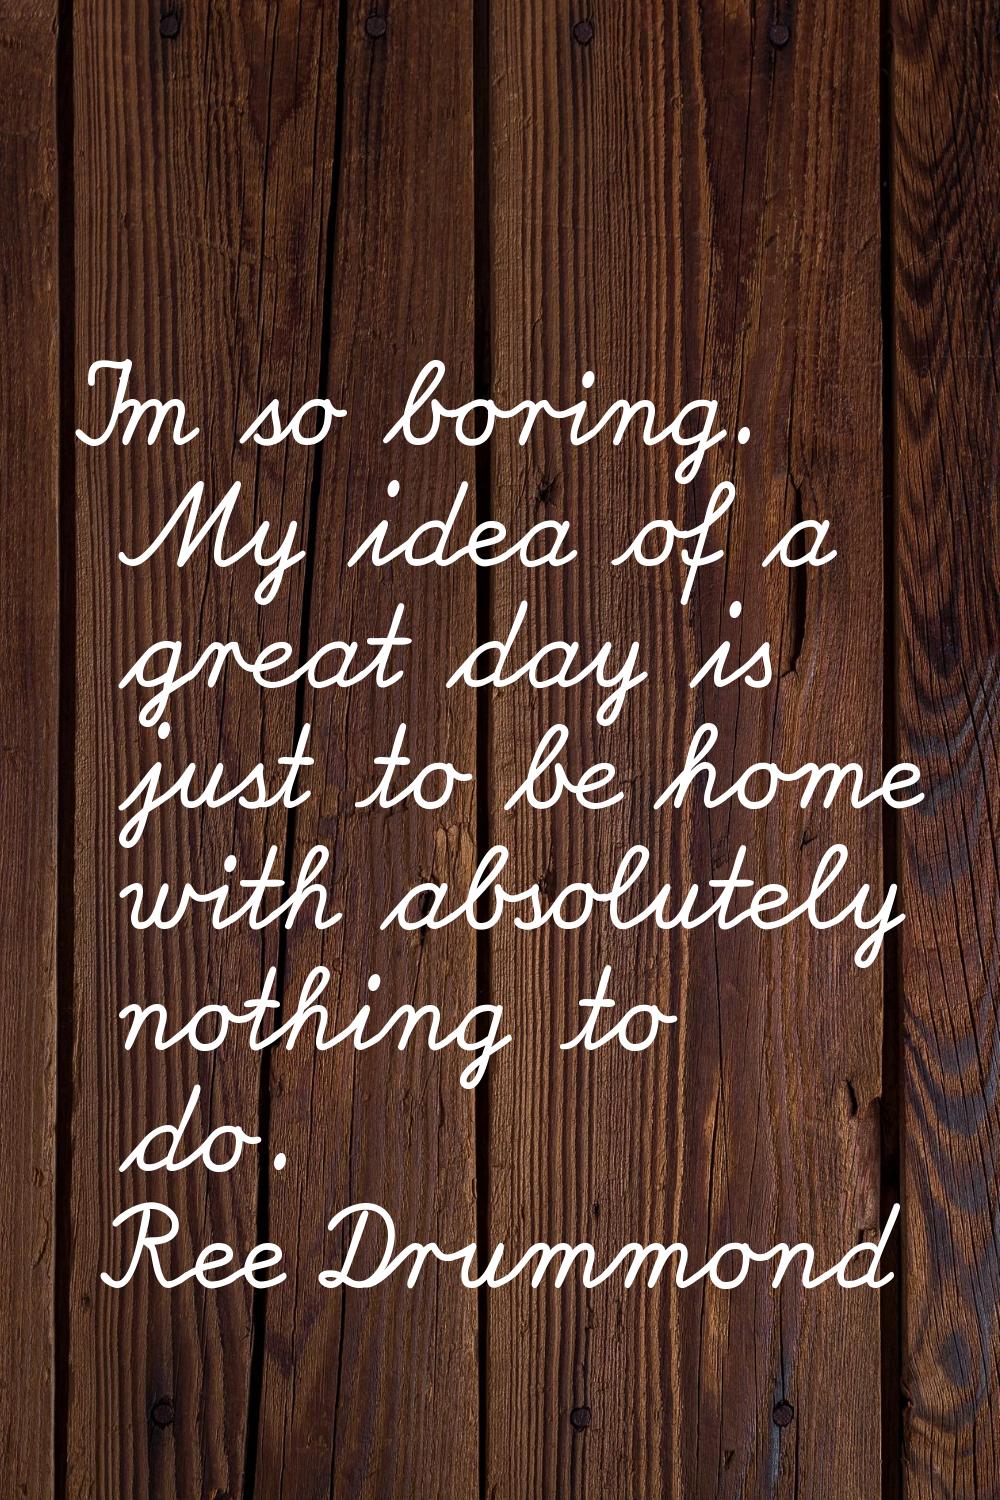 I'm so boring. My idea of a great day is just to be home with absolutely nothing to do.